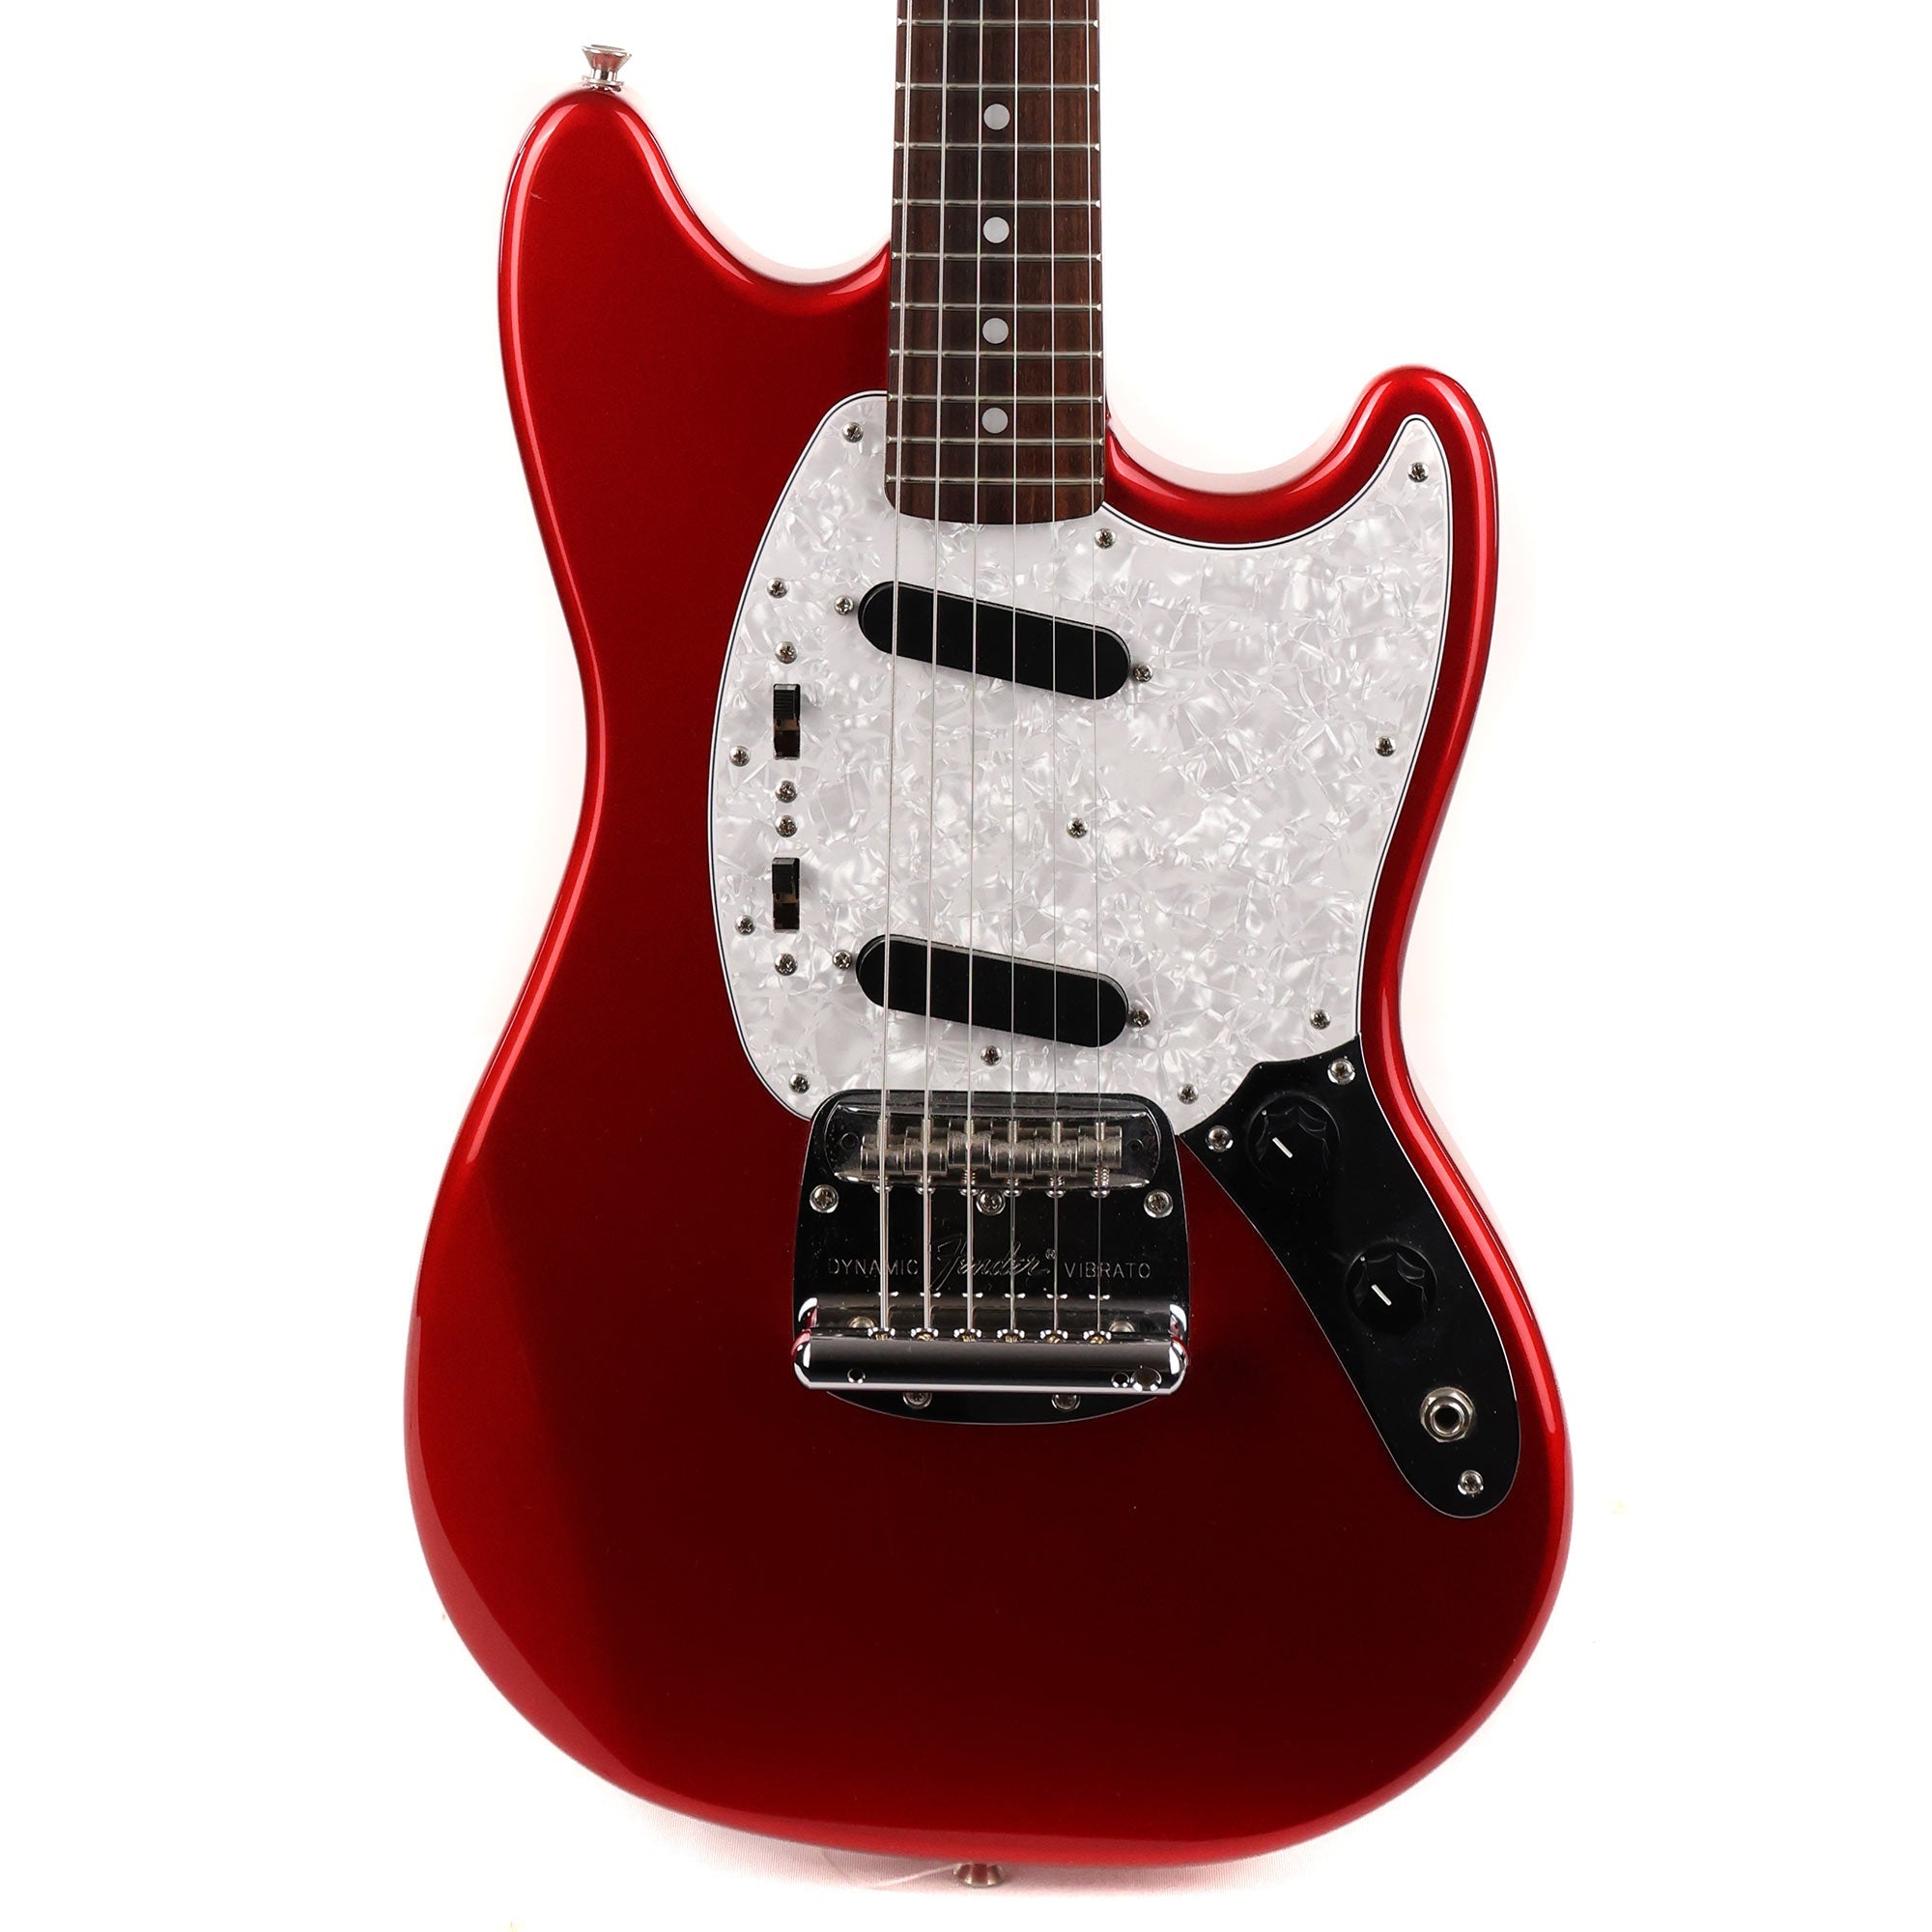 Fender MIJ Mustang Candy Apple Red with Matching Headstock | The